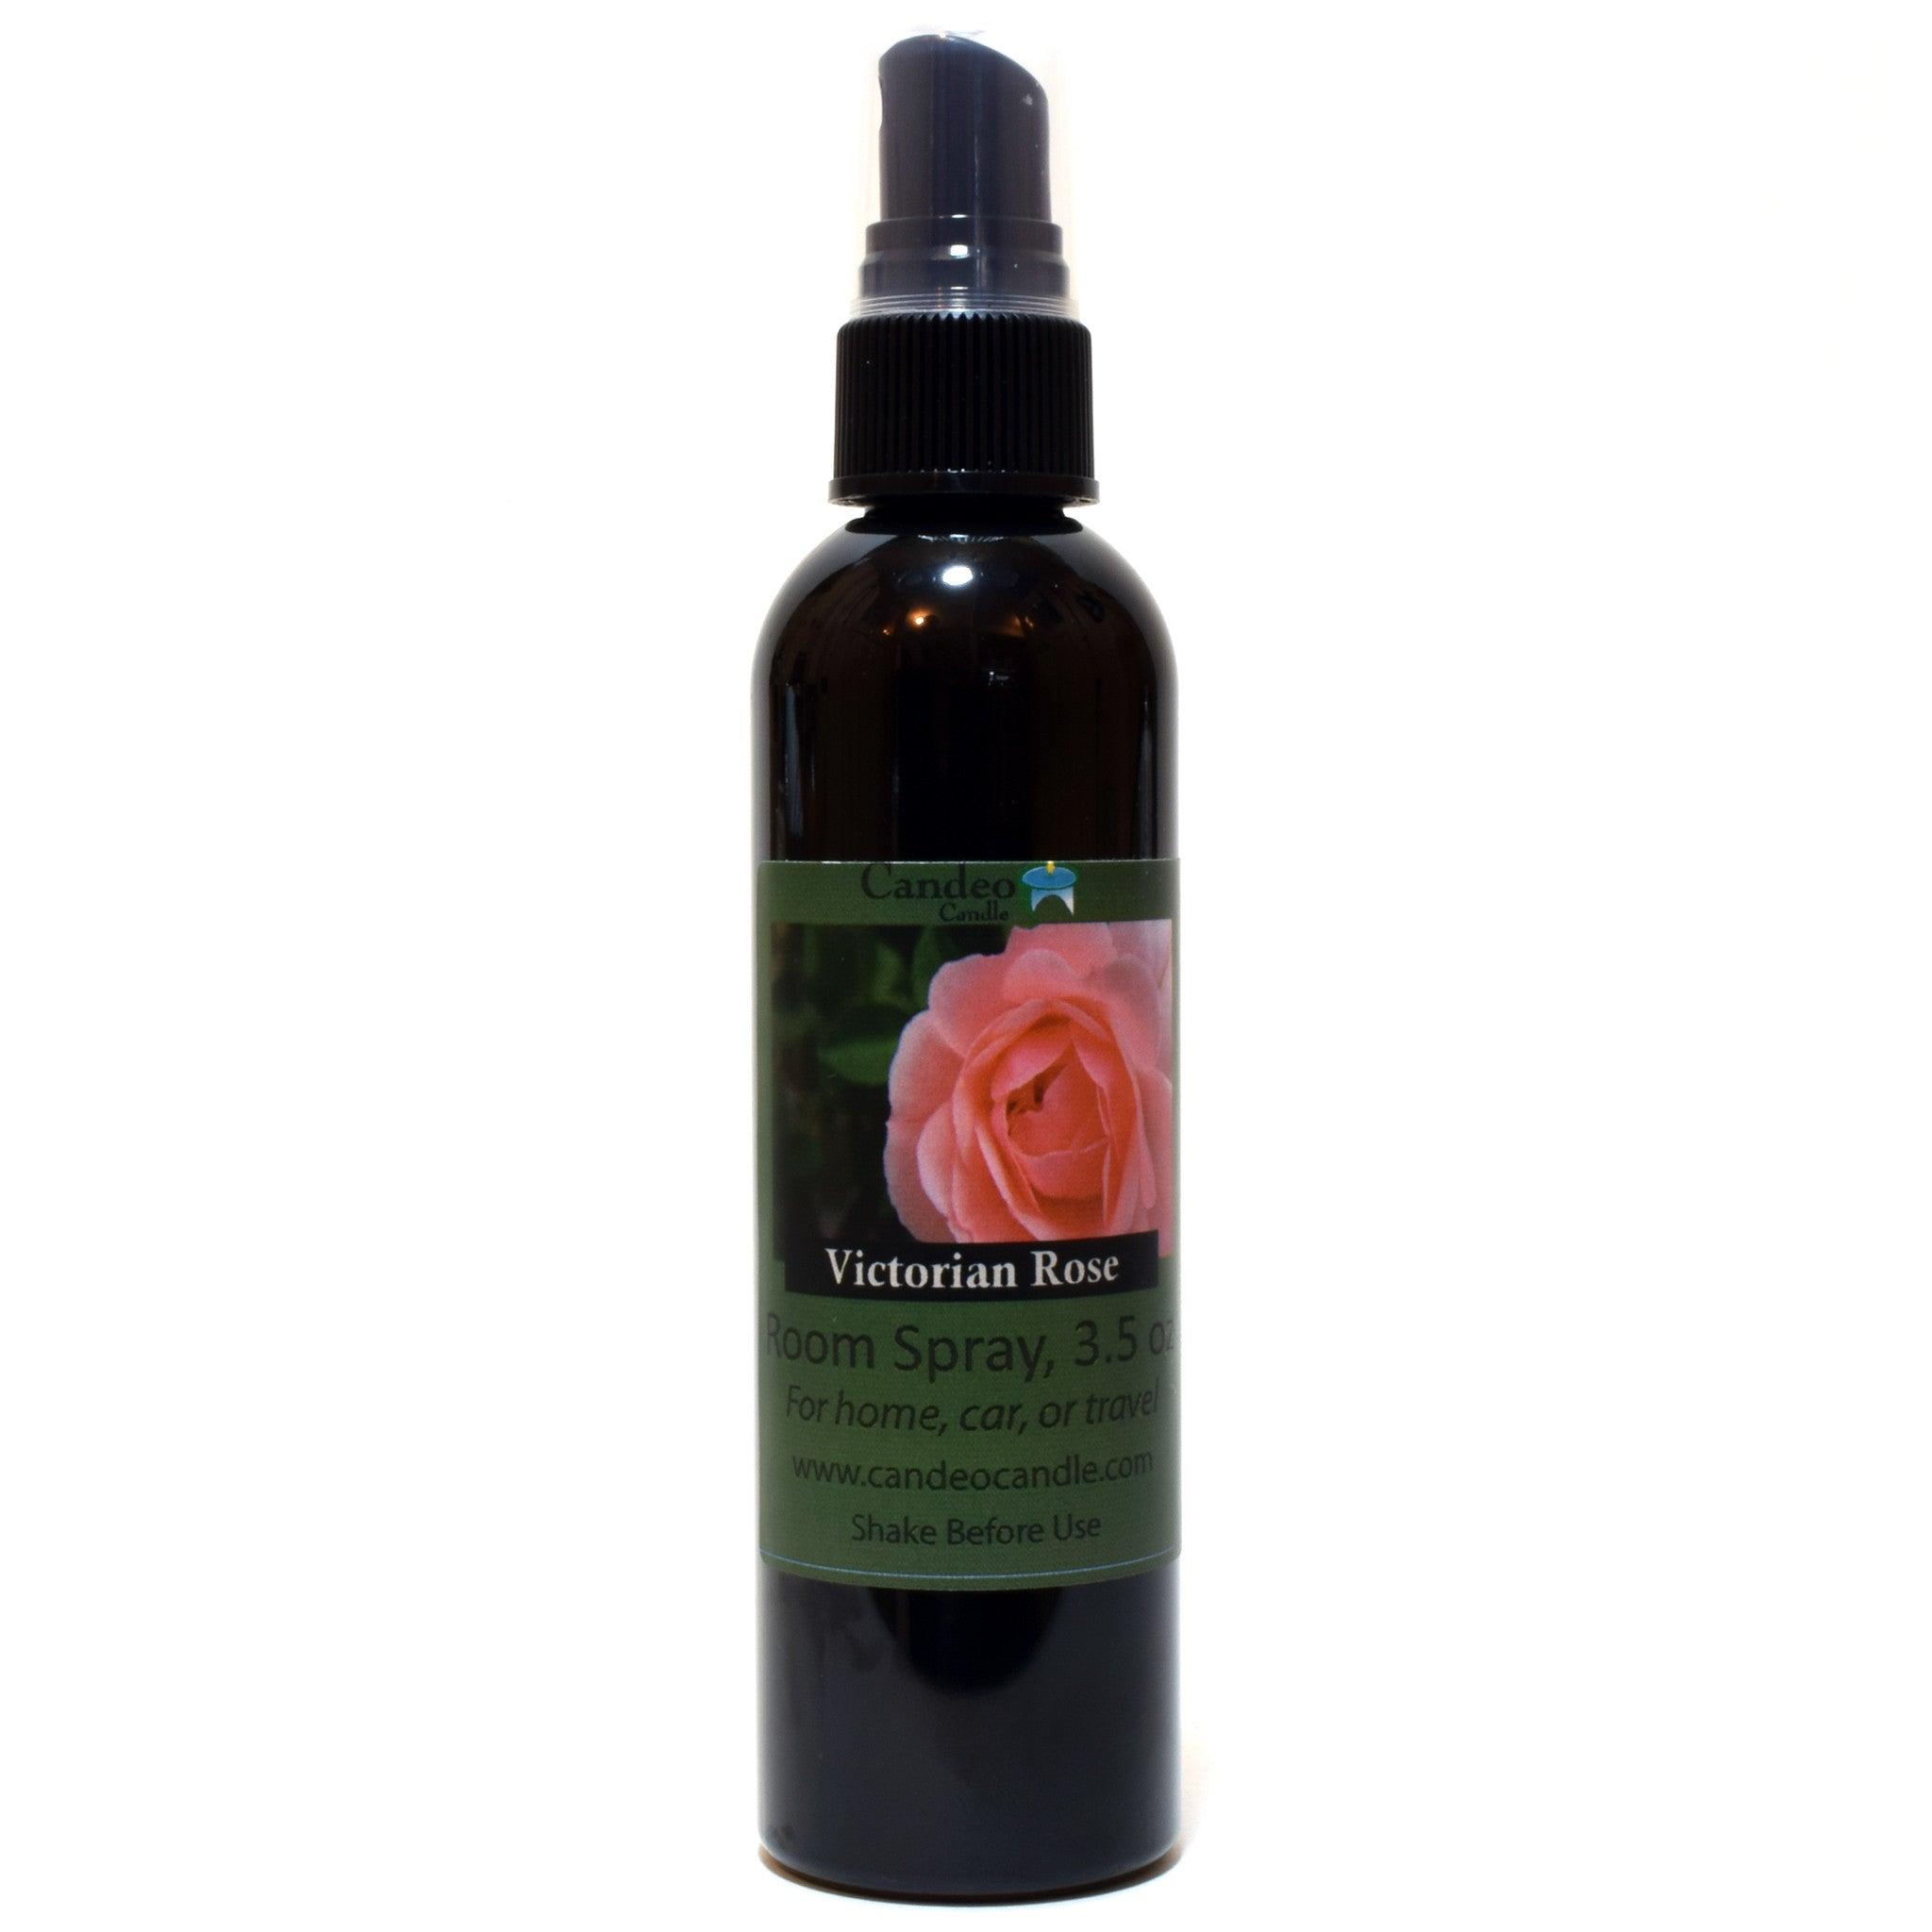 Victorian Rose, 3.5 oz Room Spray - Candeo Candle